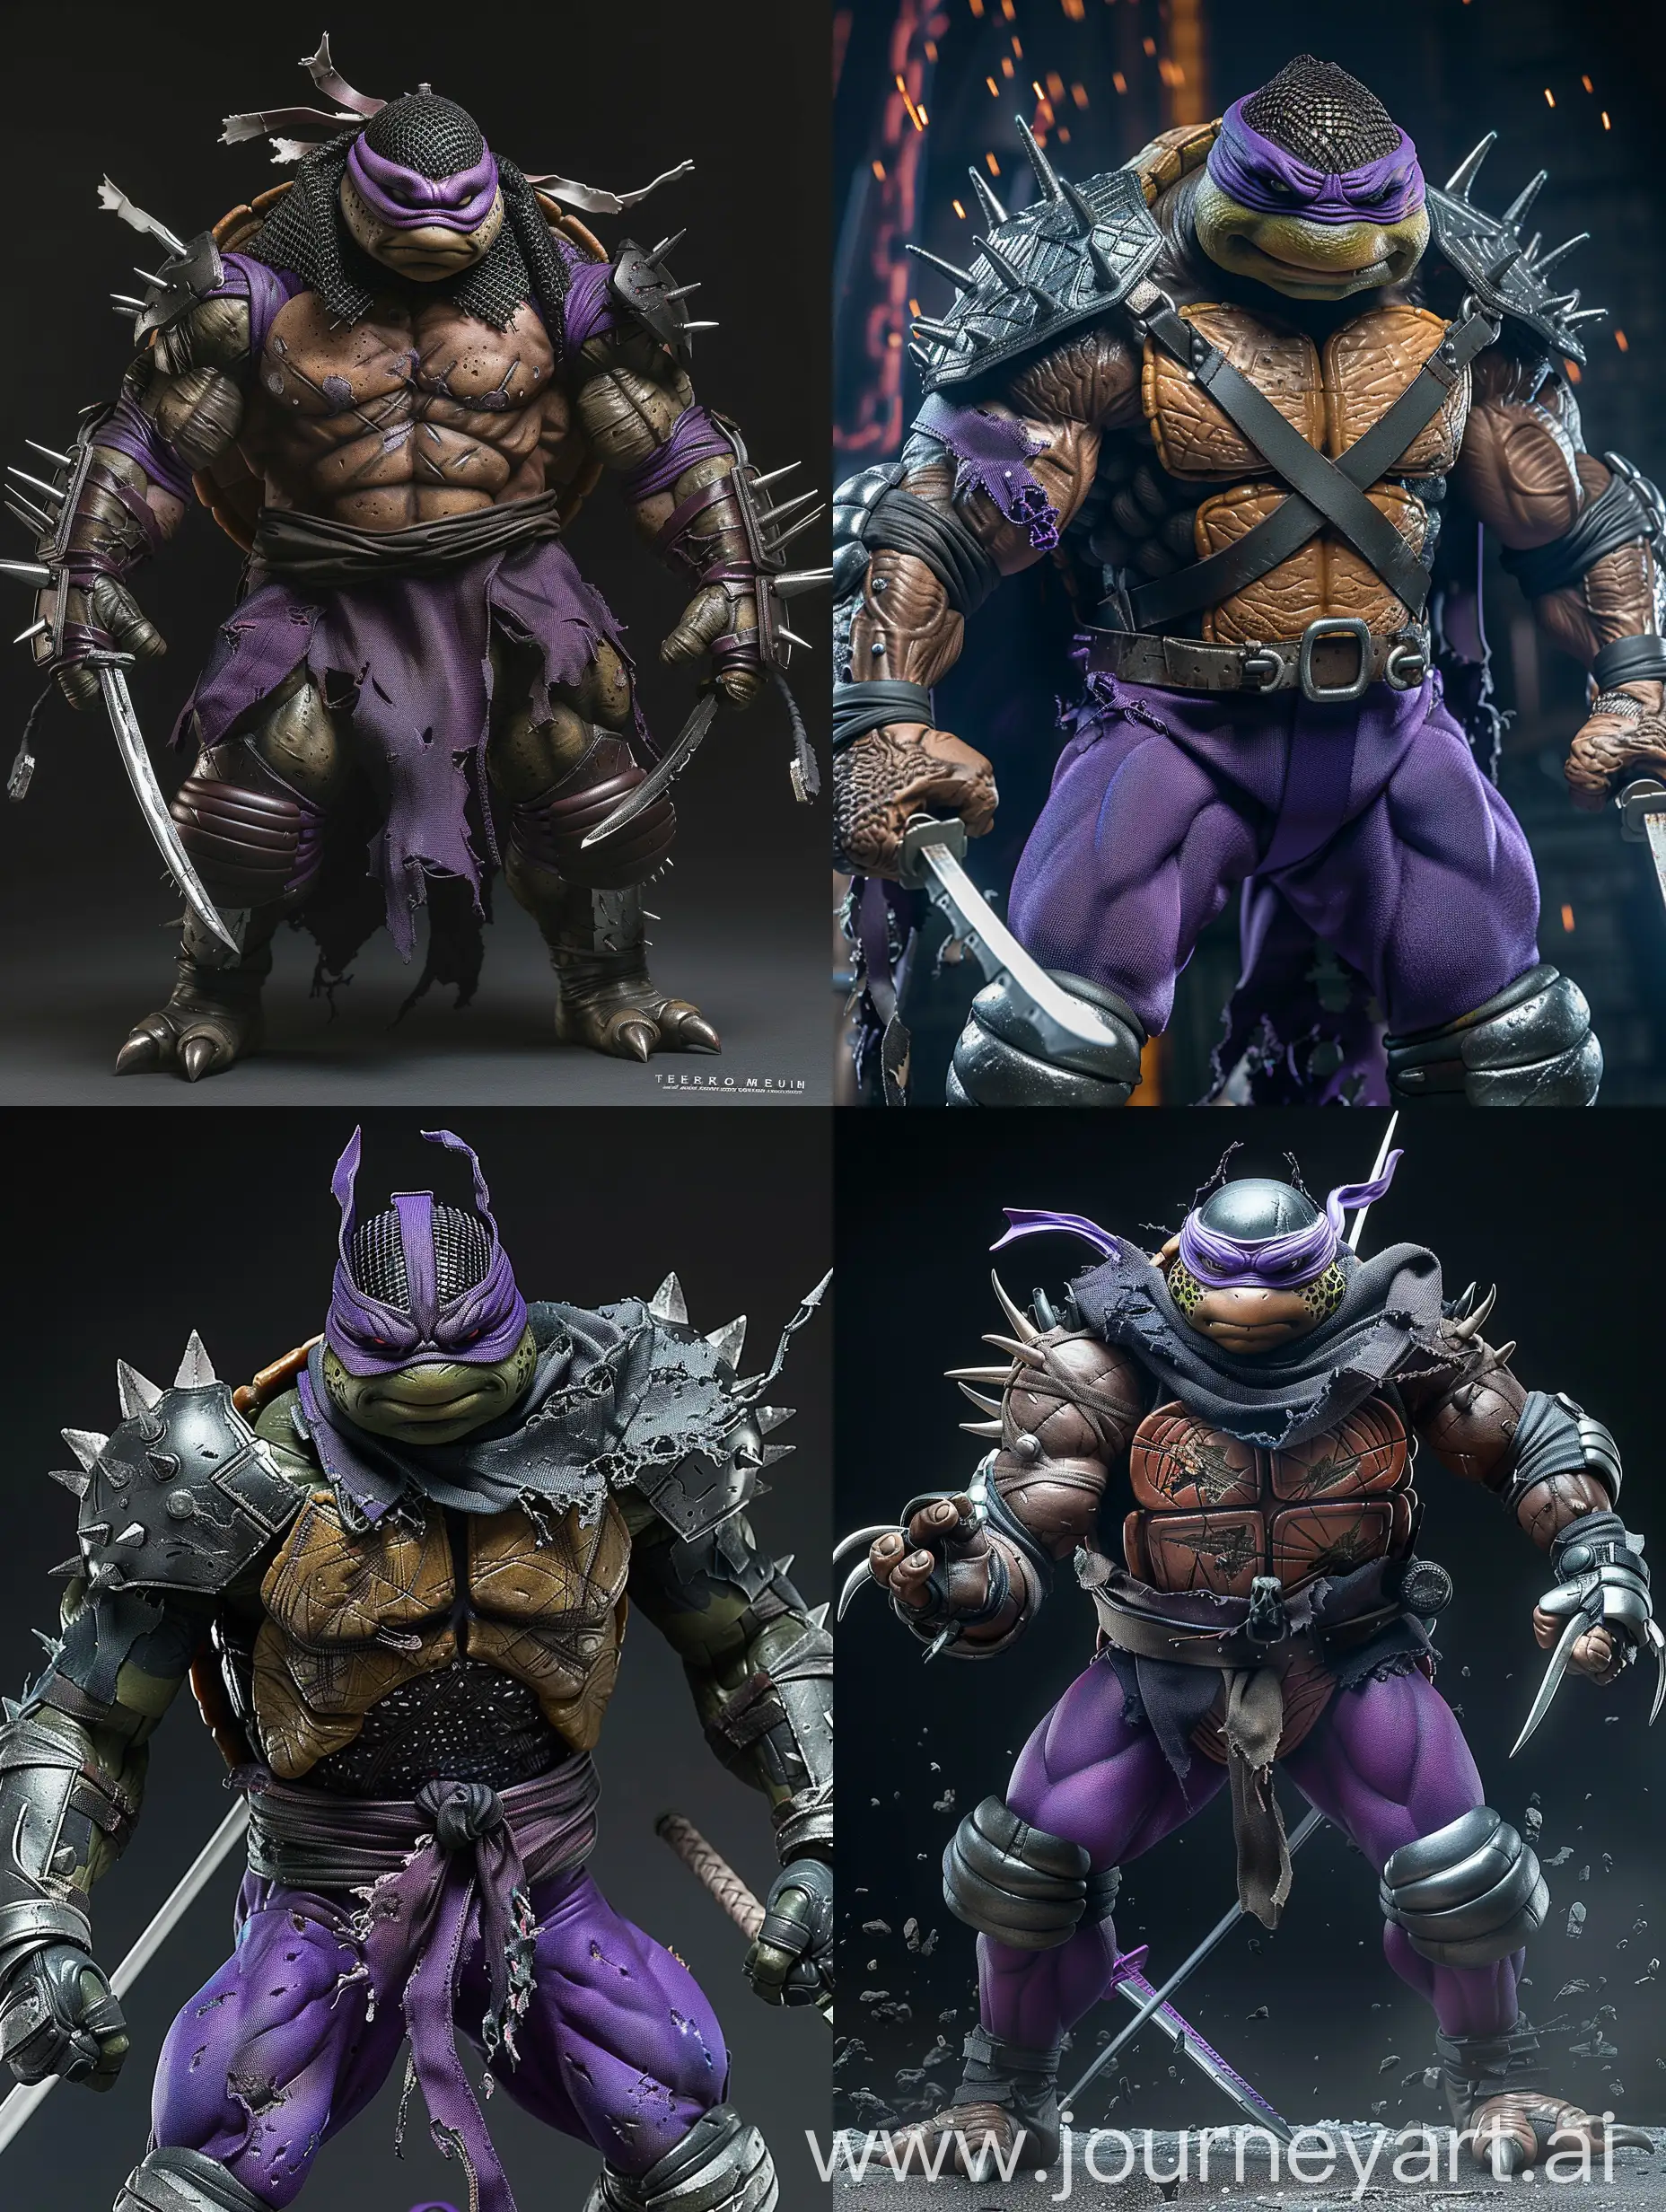 Super Shredder,  wearing a menacing Kuro kabudo helmet, serrated blades, and bulging muscles that bring the iconic character to life. The sculpt details are unparalleled, showcasing intricate mesh patterns on his purple suit, a tattered and ominous cape, an array of blades, varied grips, and dynamic energy bursts emanating from his hands. The meticulous design extends to the metallic and obsidian armor, complete with steel claws and textured plates covering his arms and legs, Teenage Mutant Ninja Turtles, hyper realistic, ultra detailed photography